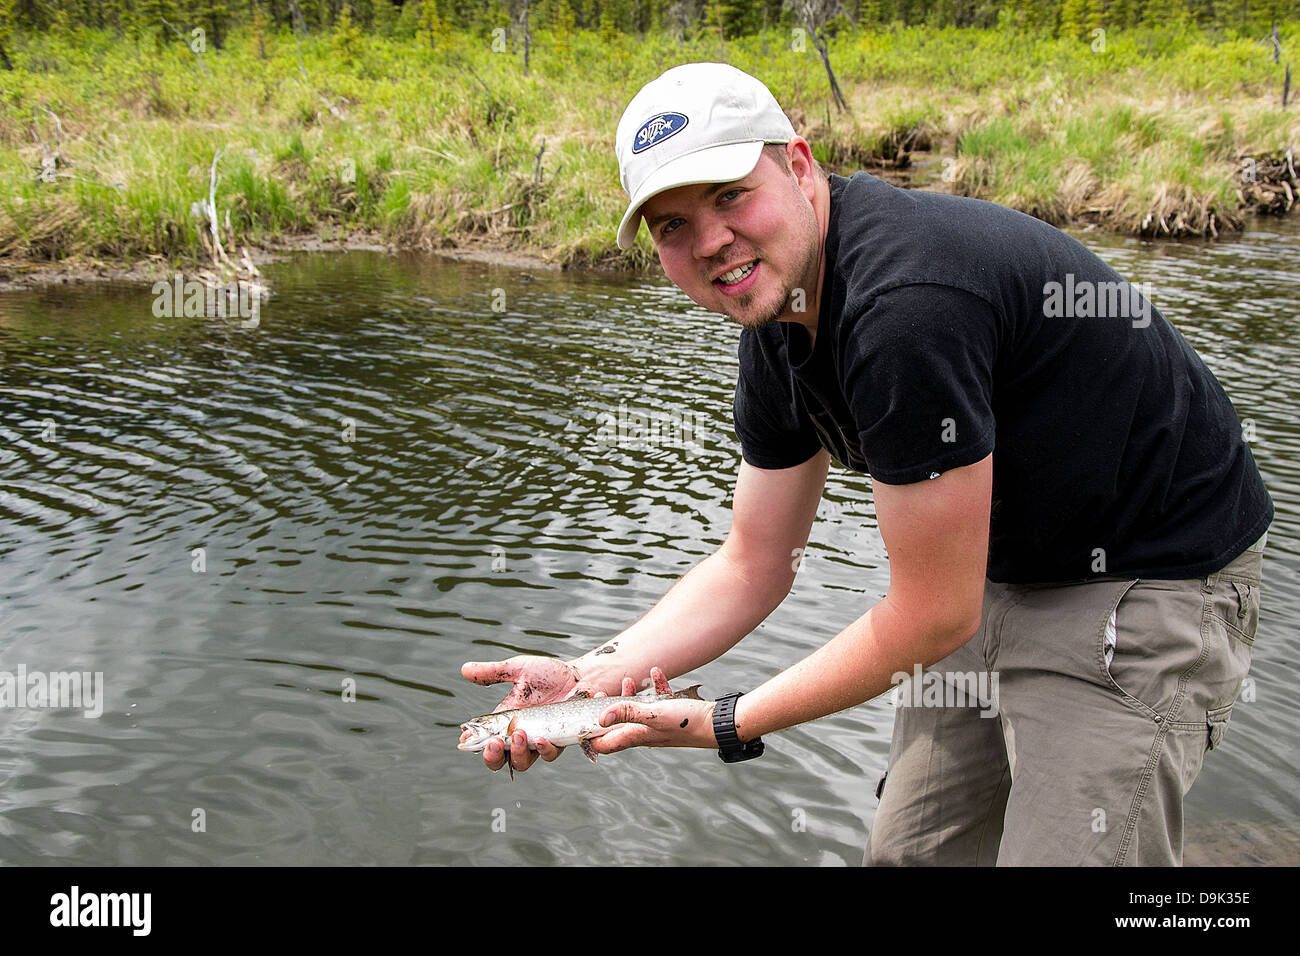 Fly fisherman showing off fresh catch of a brook trout Stock Photo